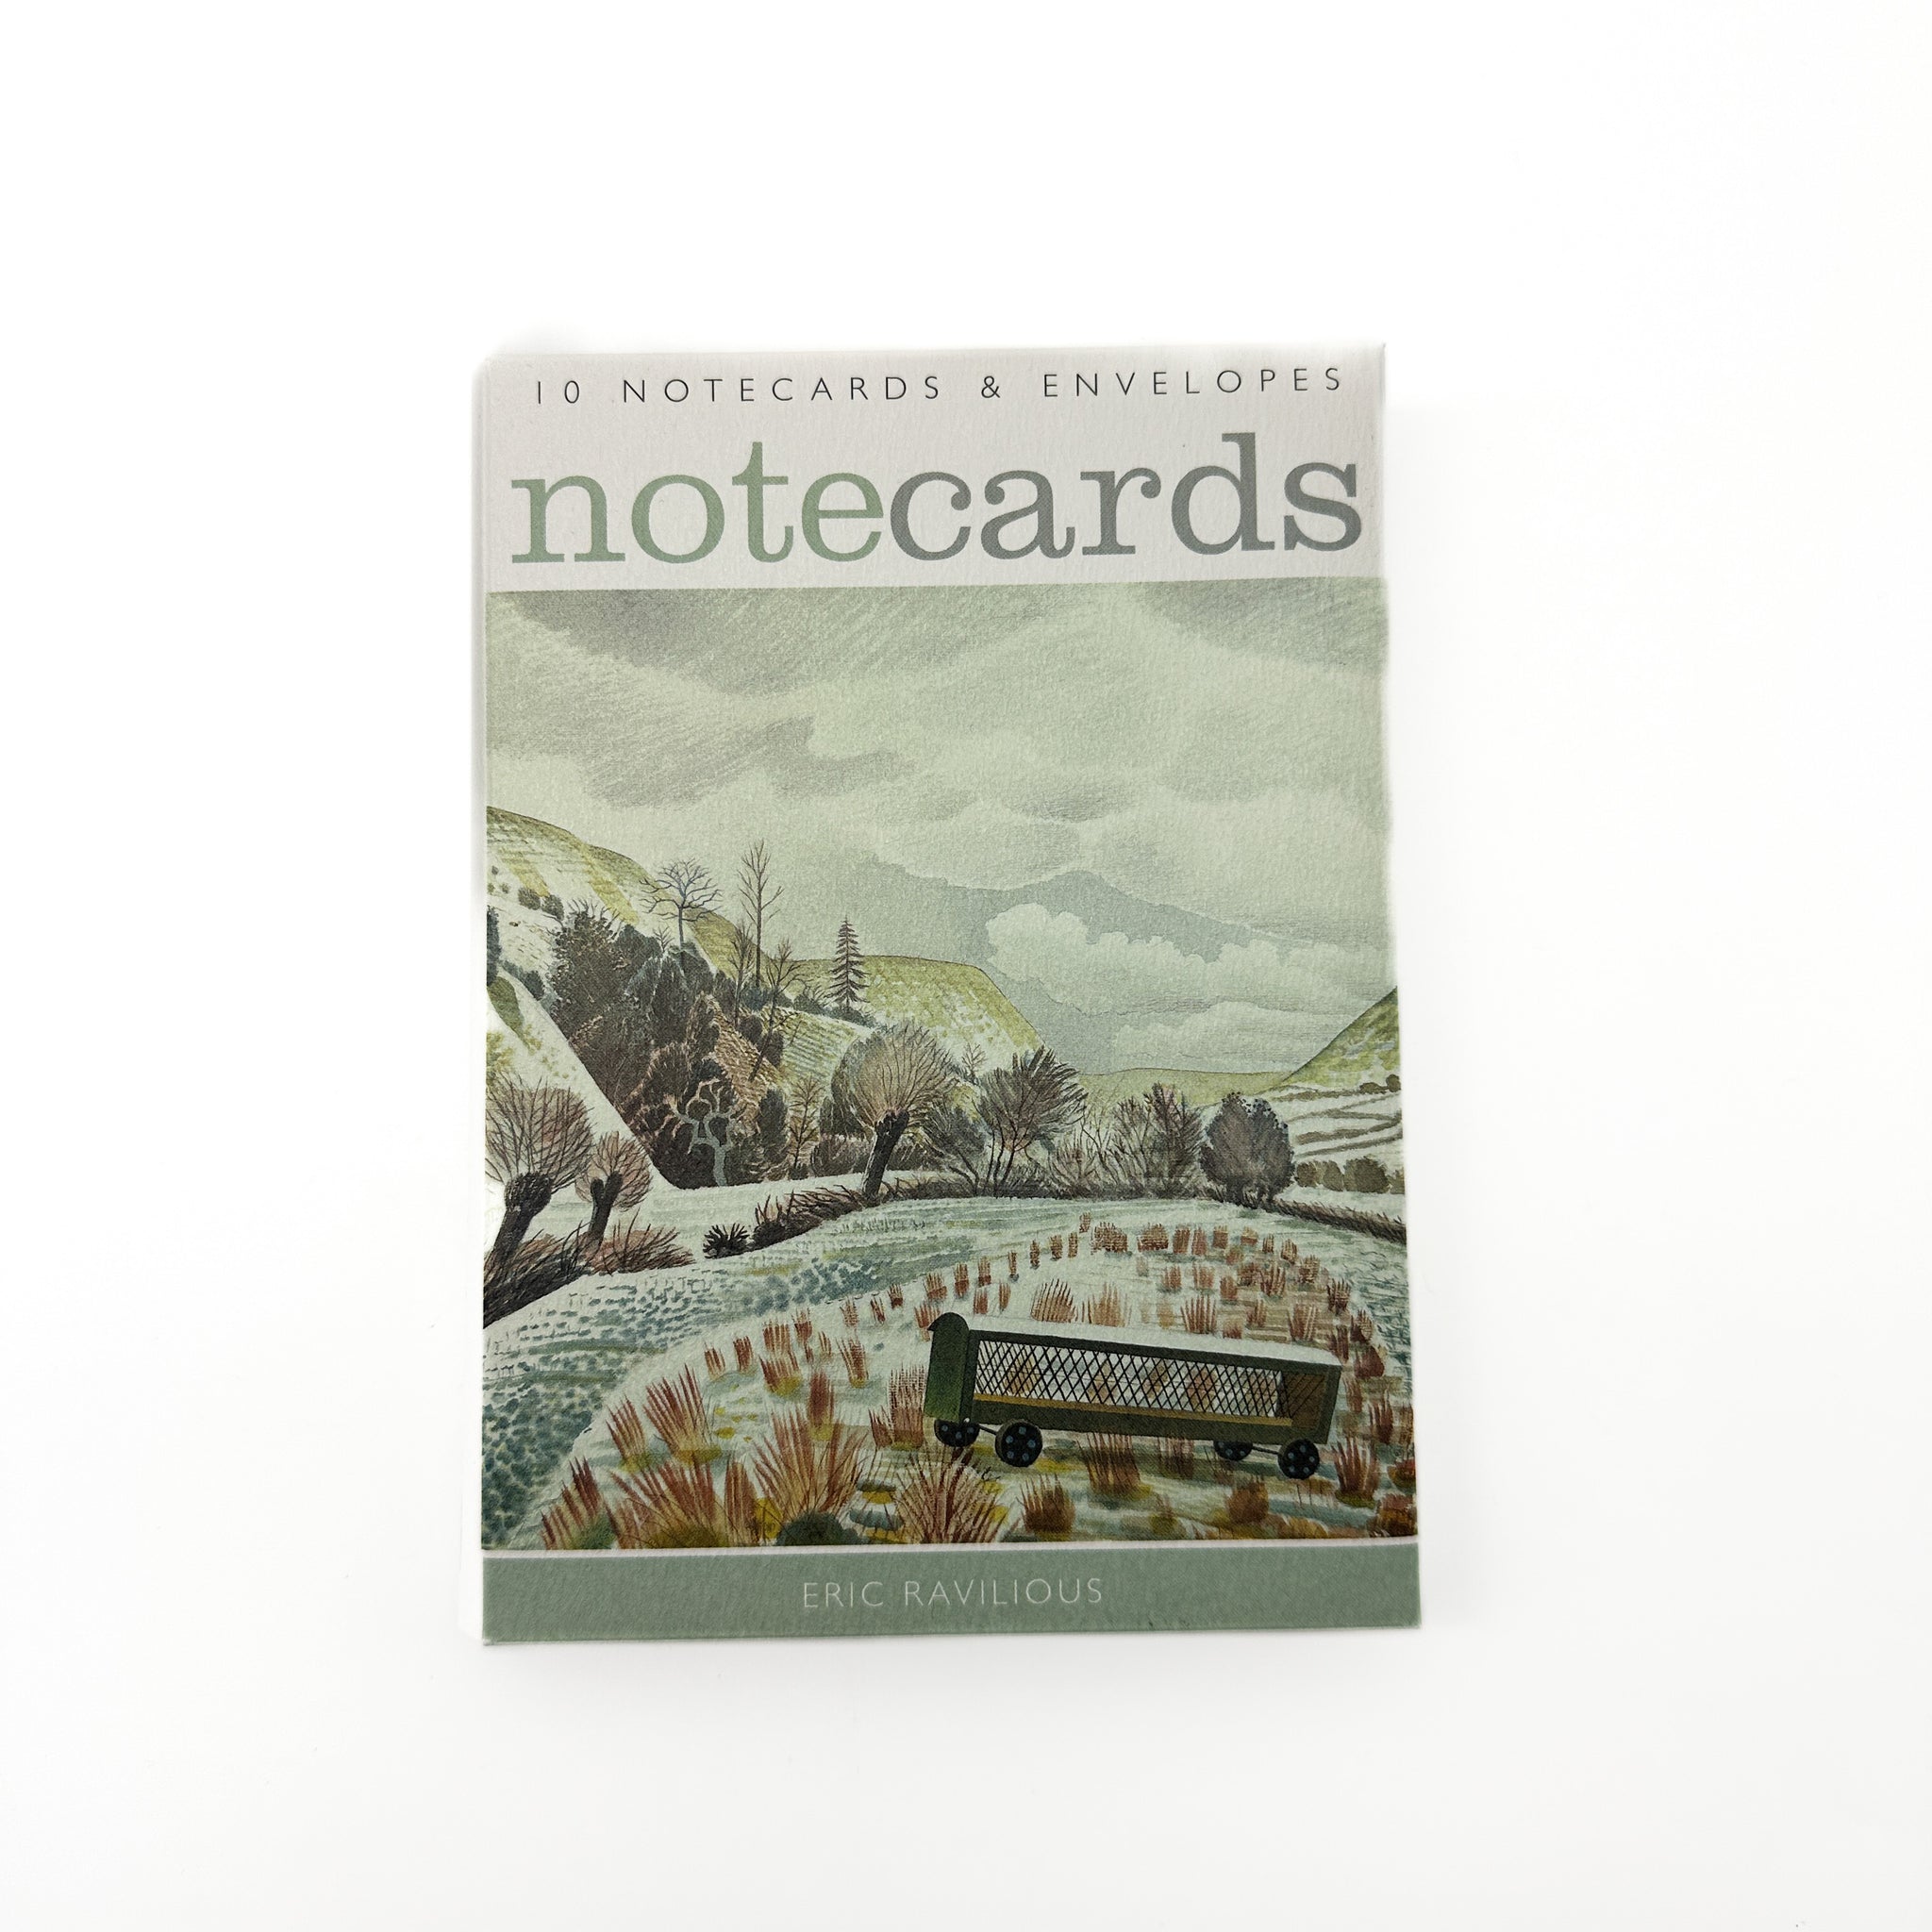 8 Notecards by Eric Ravilious and Edward Bawden